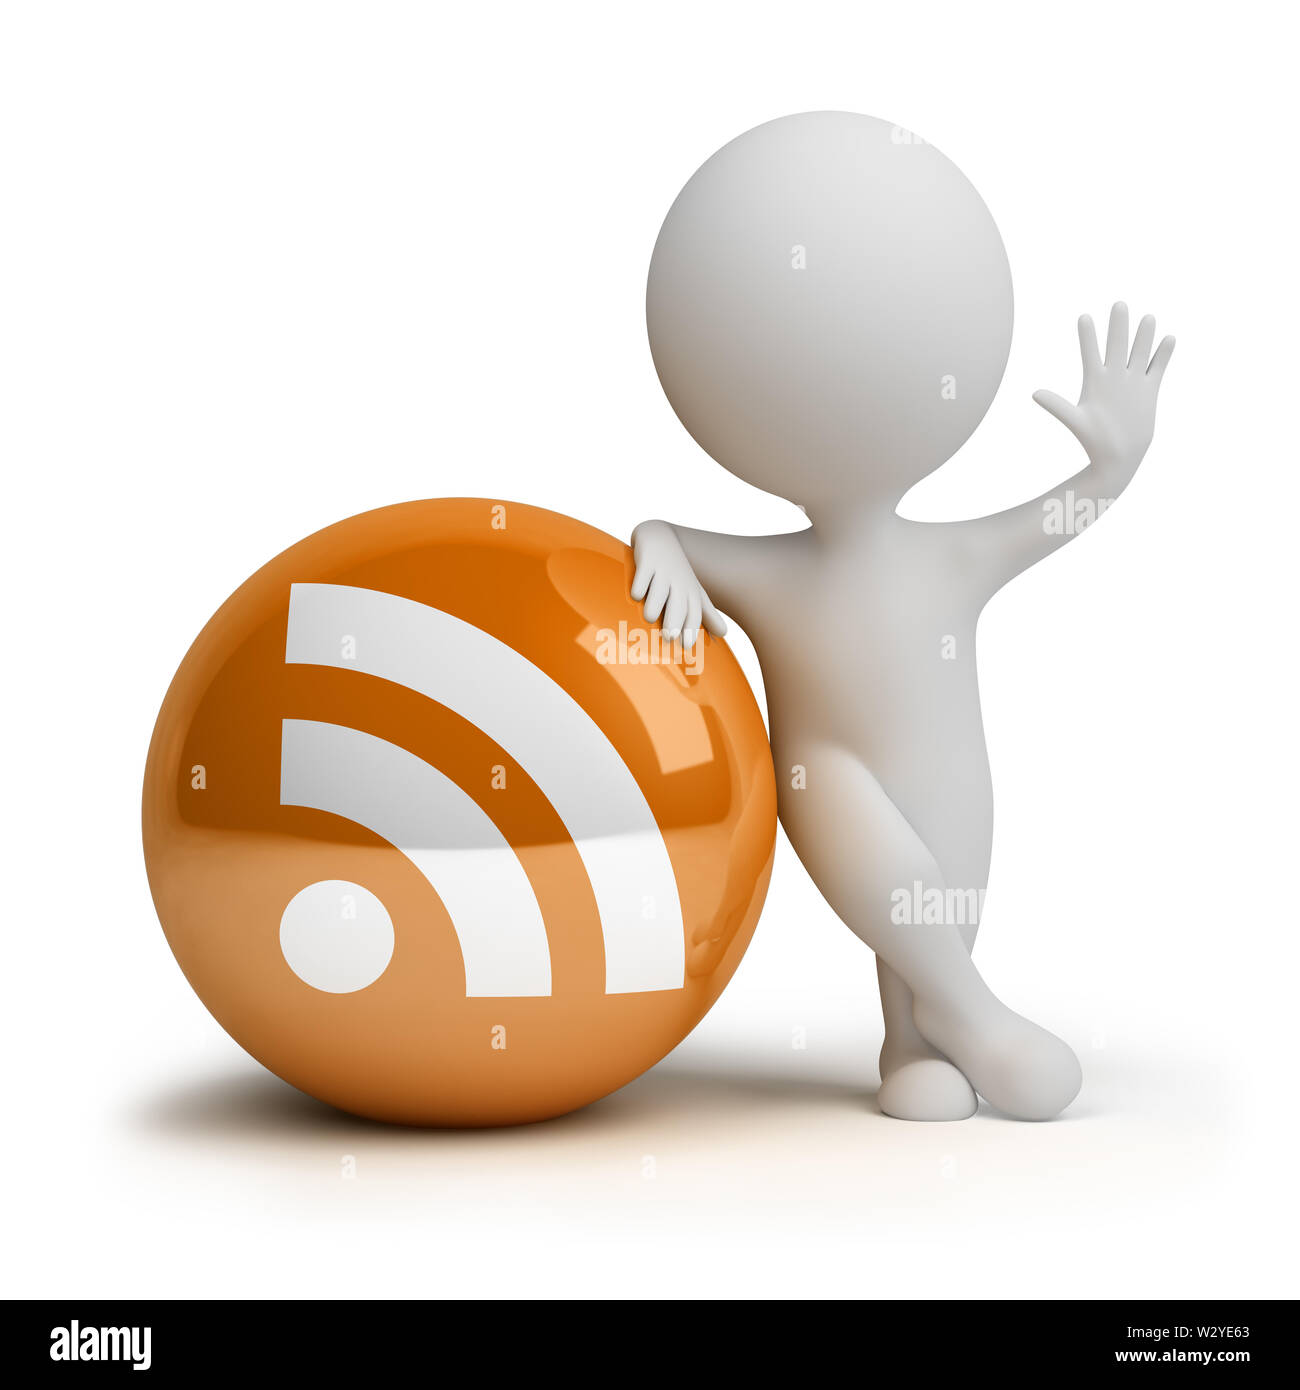 3d small person standing next to the rss icon. 3d image. Isolated white background. Stock Photo